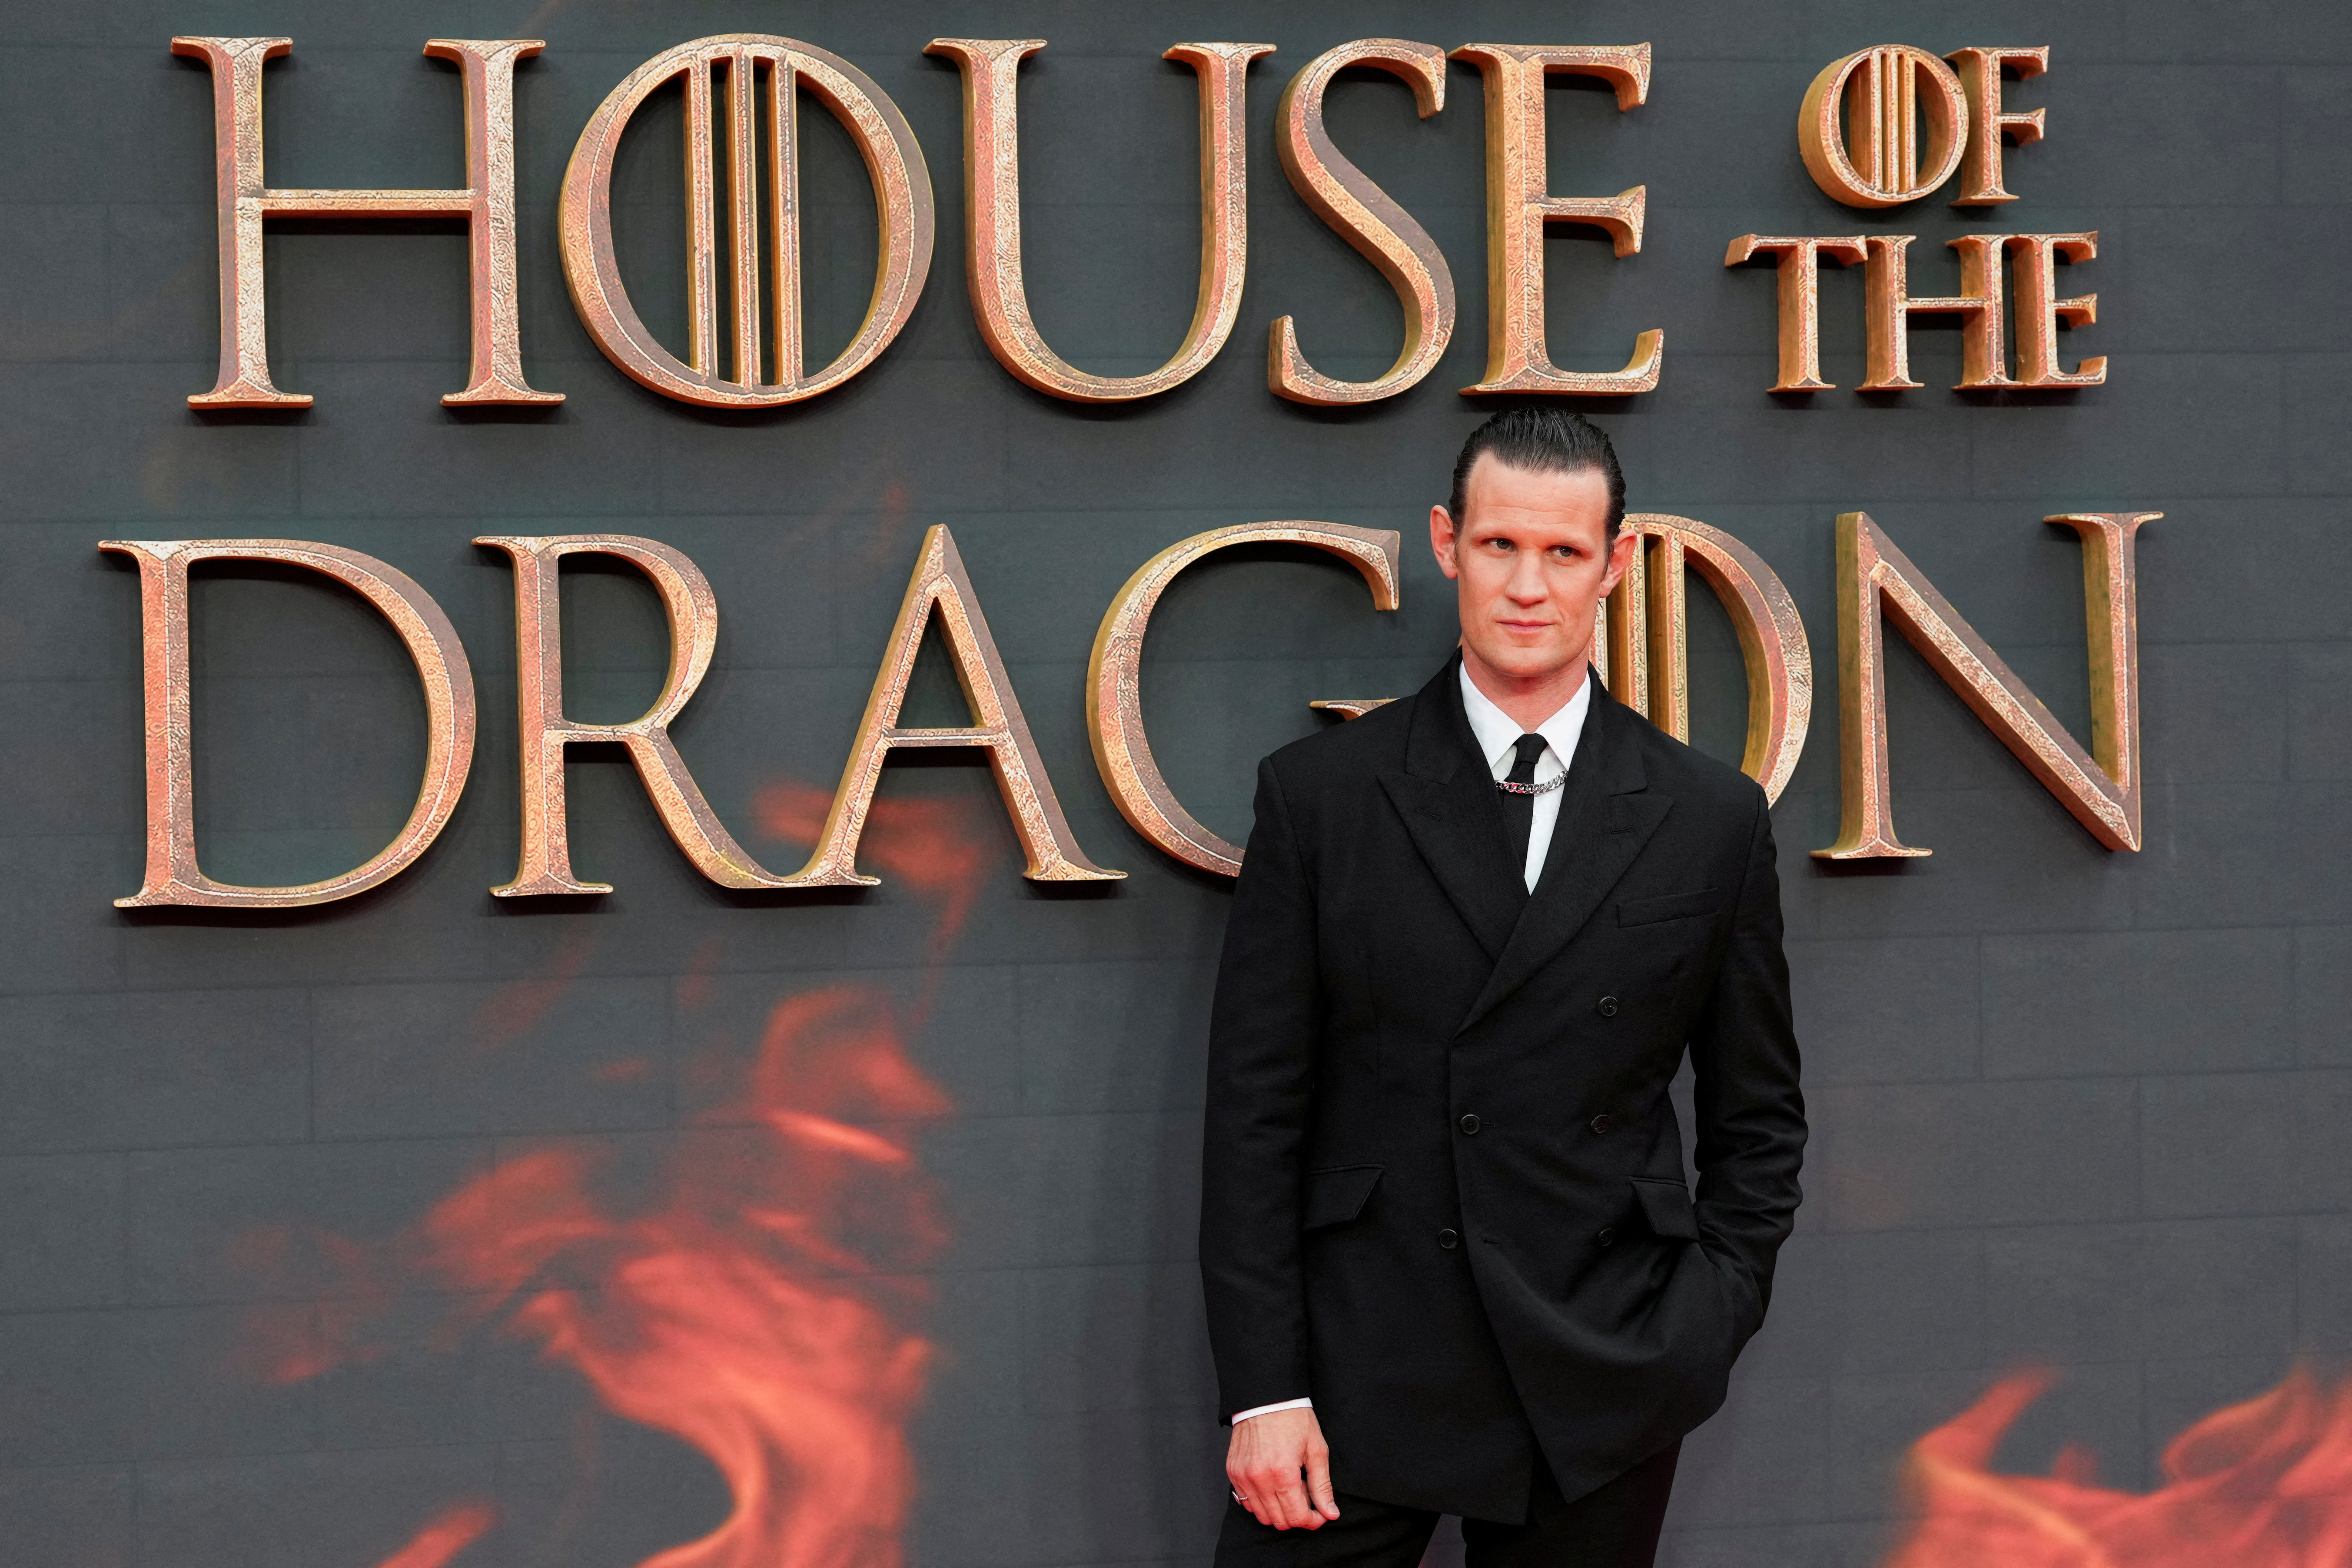 House of the Dragon HBO show popularity, critics and viewer data